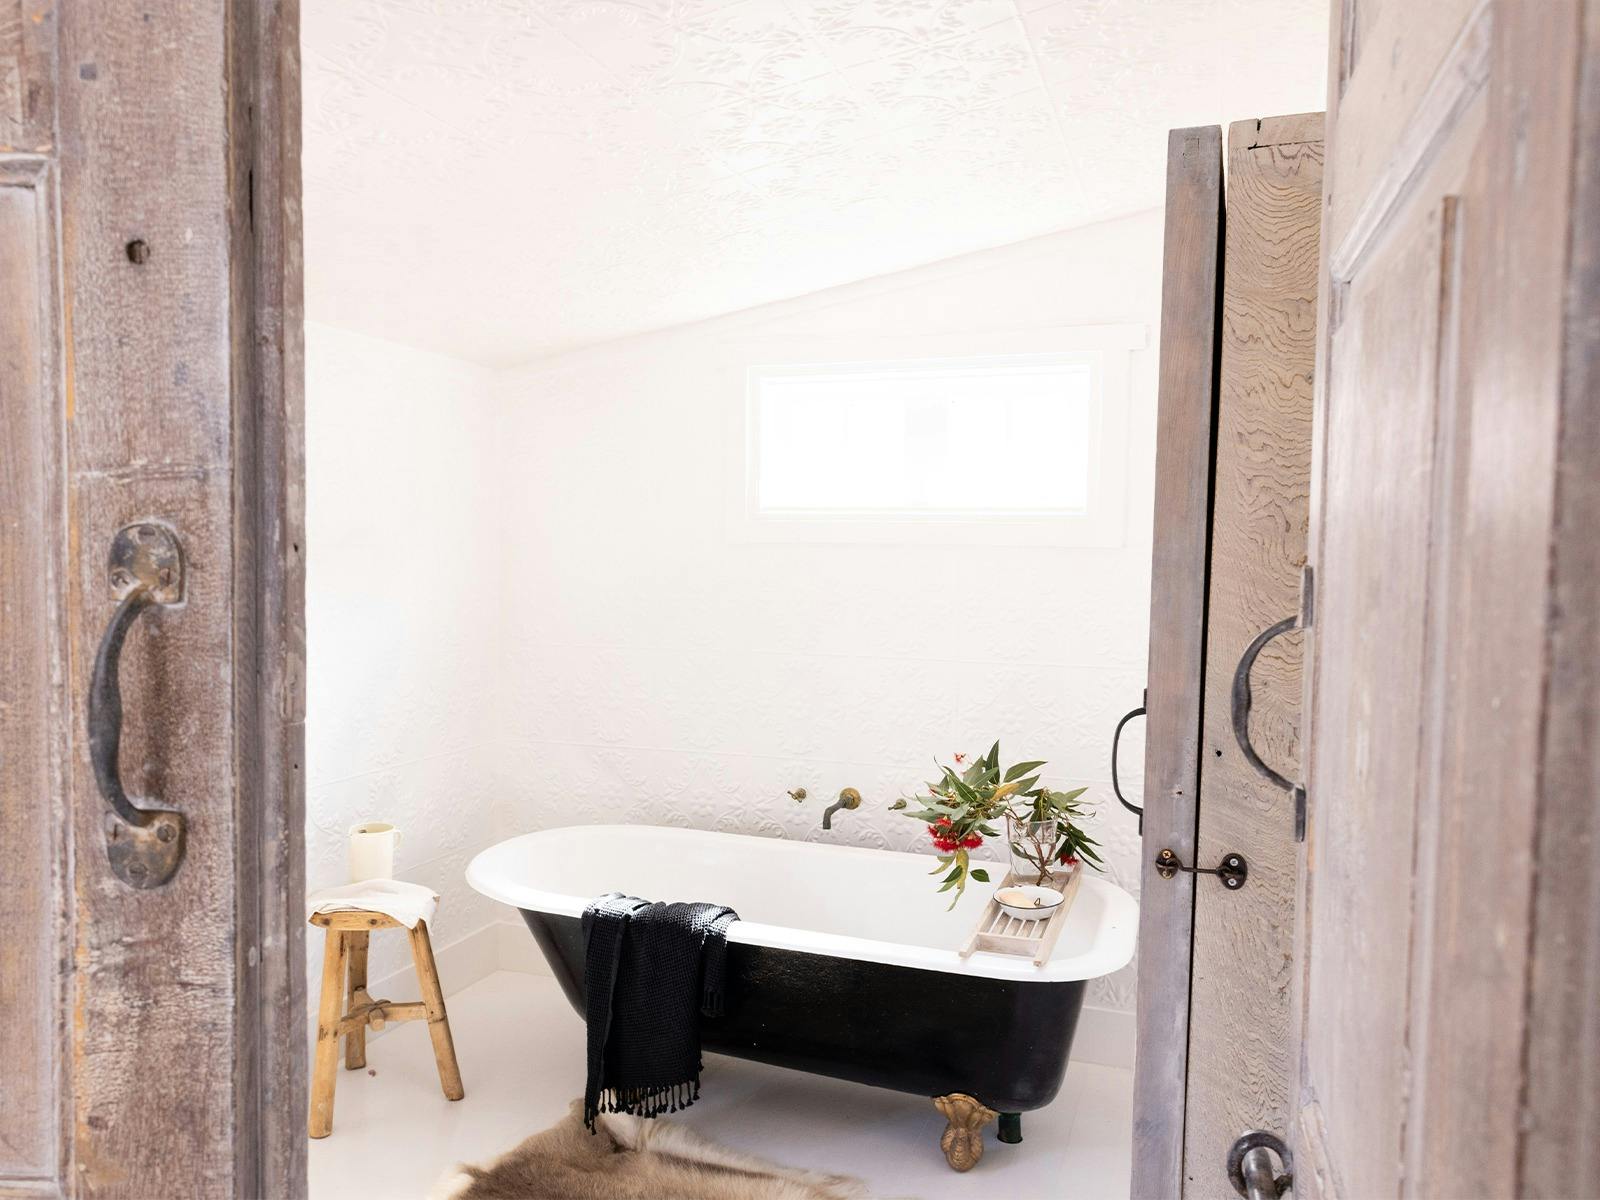 A black claw foot bath tub sits in an all white pressed tin bathroom with wooden details